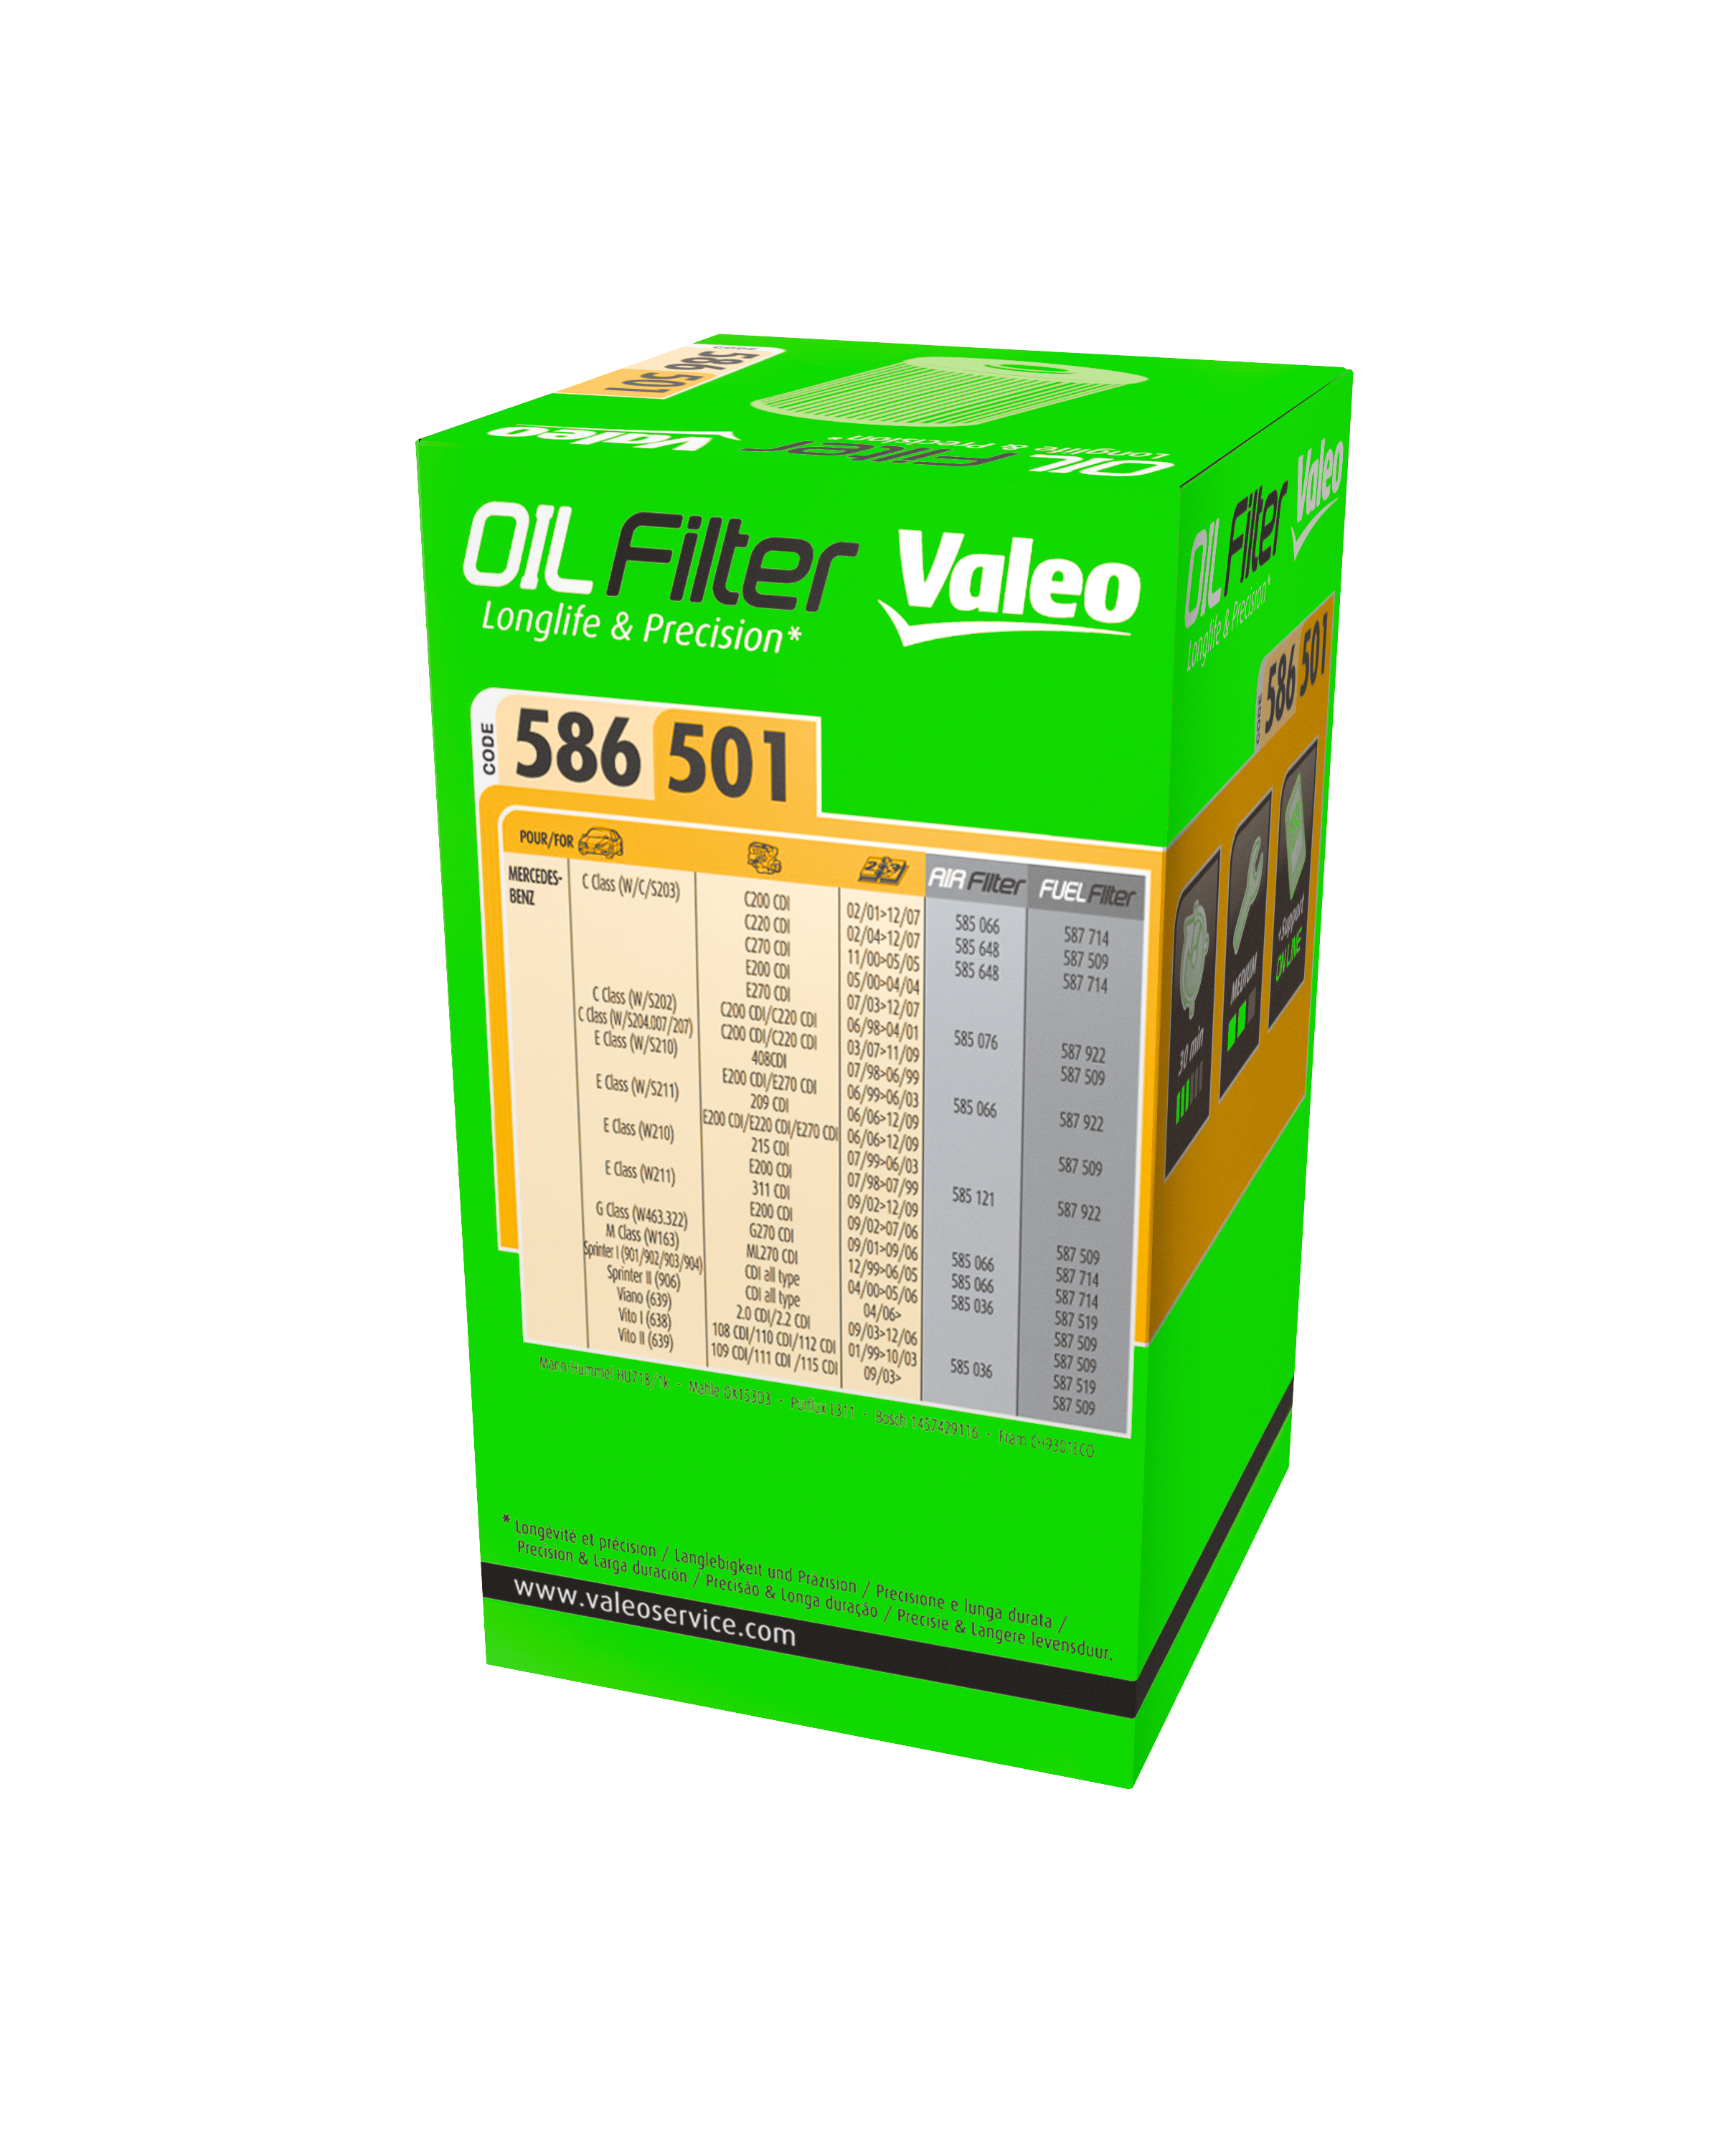 Oil filter packaging by Valeo